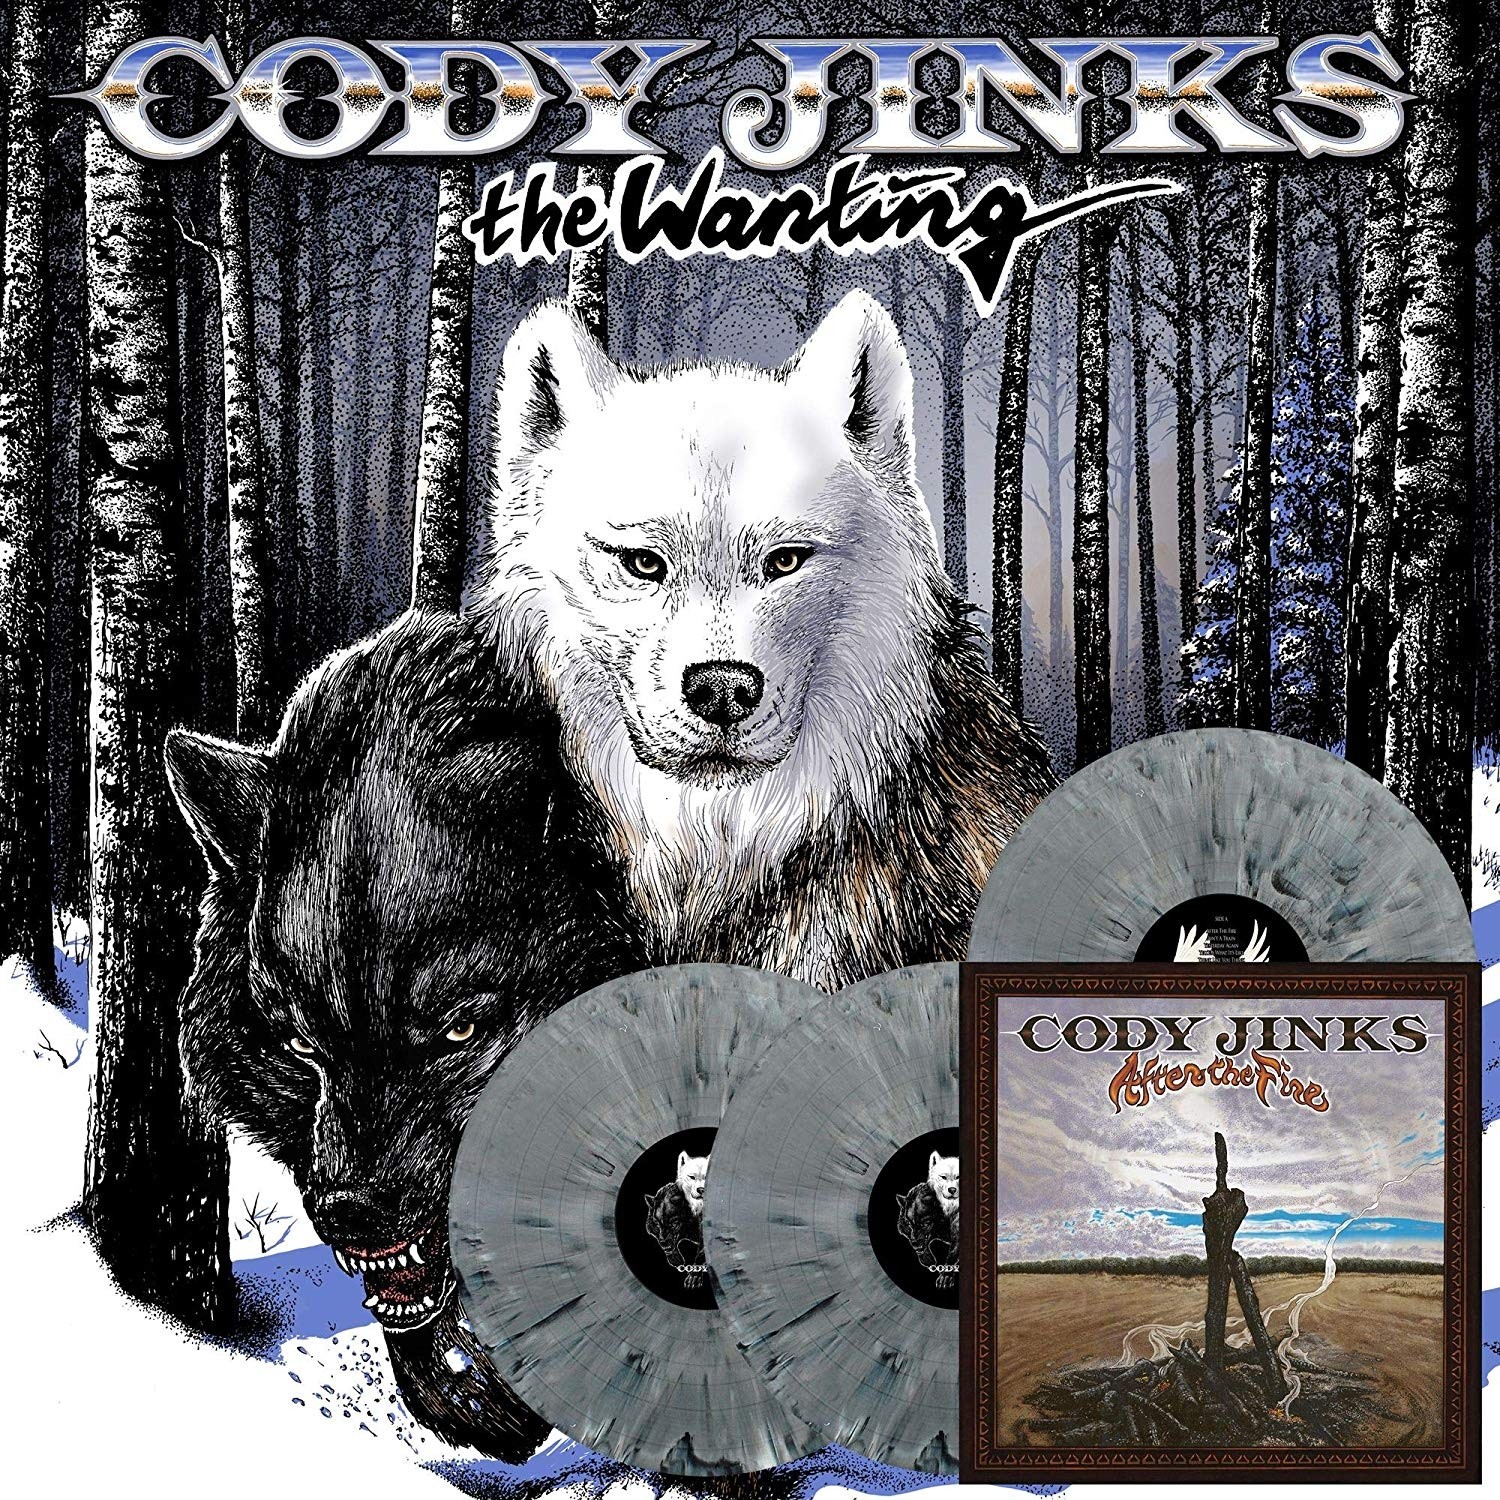 Cody Jinks - Wanting After The Fire (Smoke) 3XLP